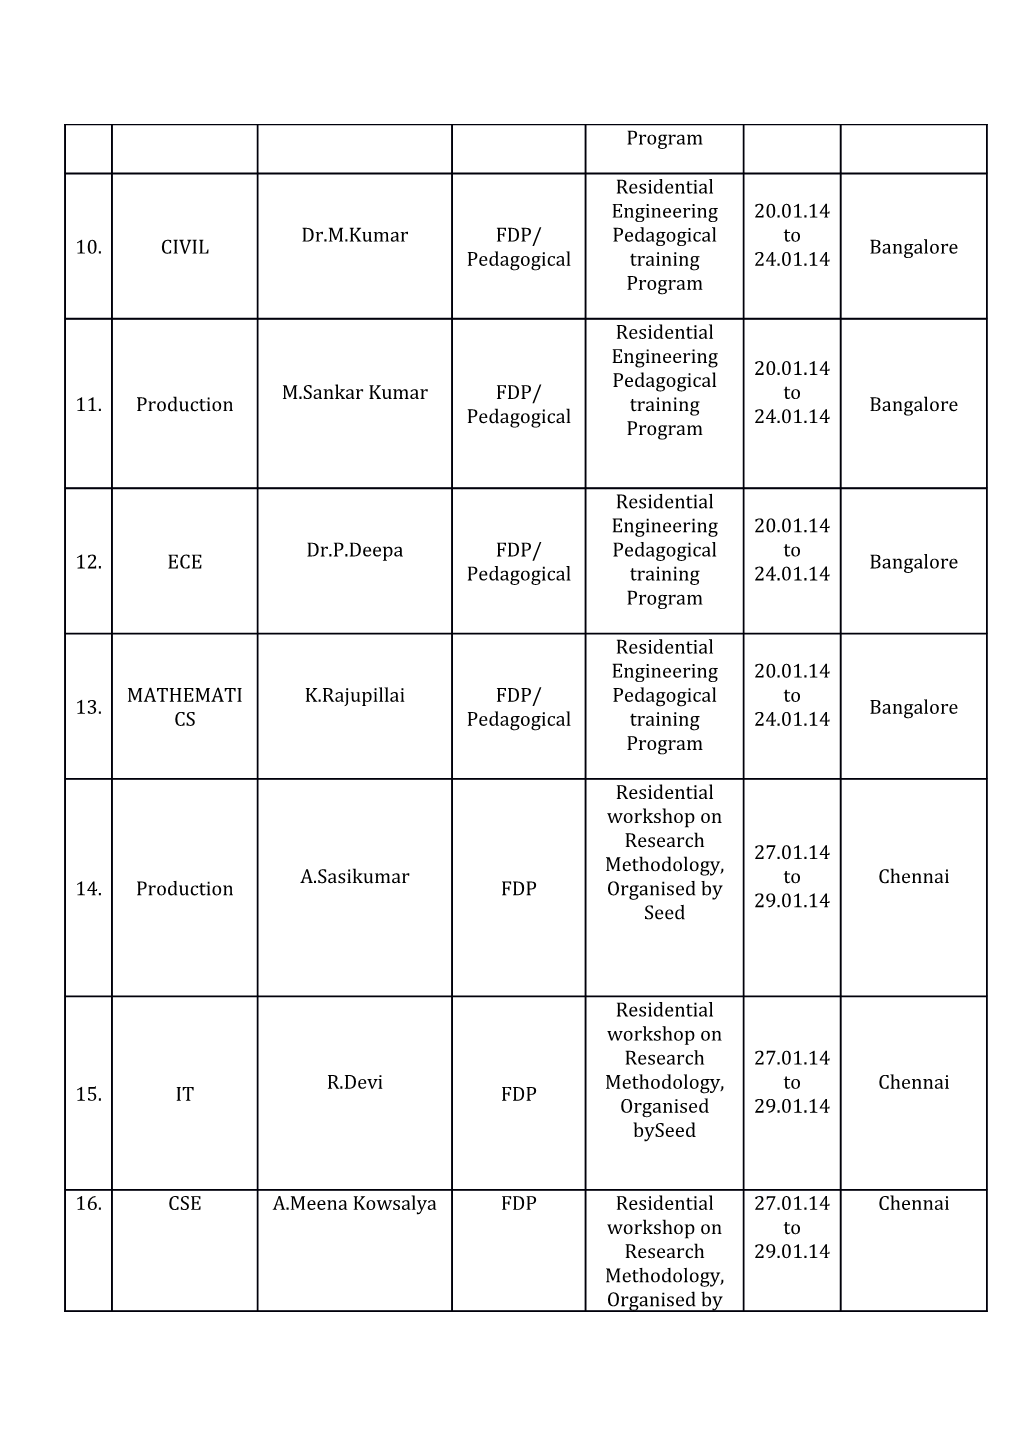 PROGRAMMES ATTENDED by the FACULTY (At Other Institutions)